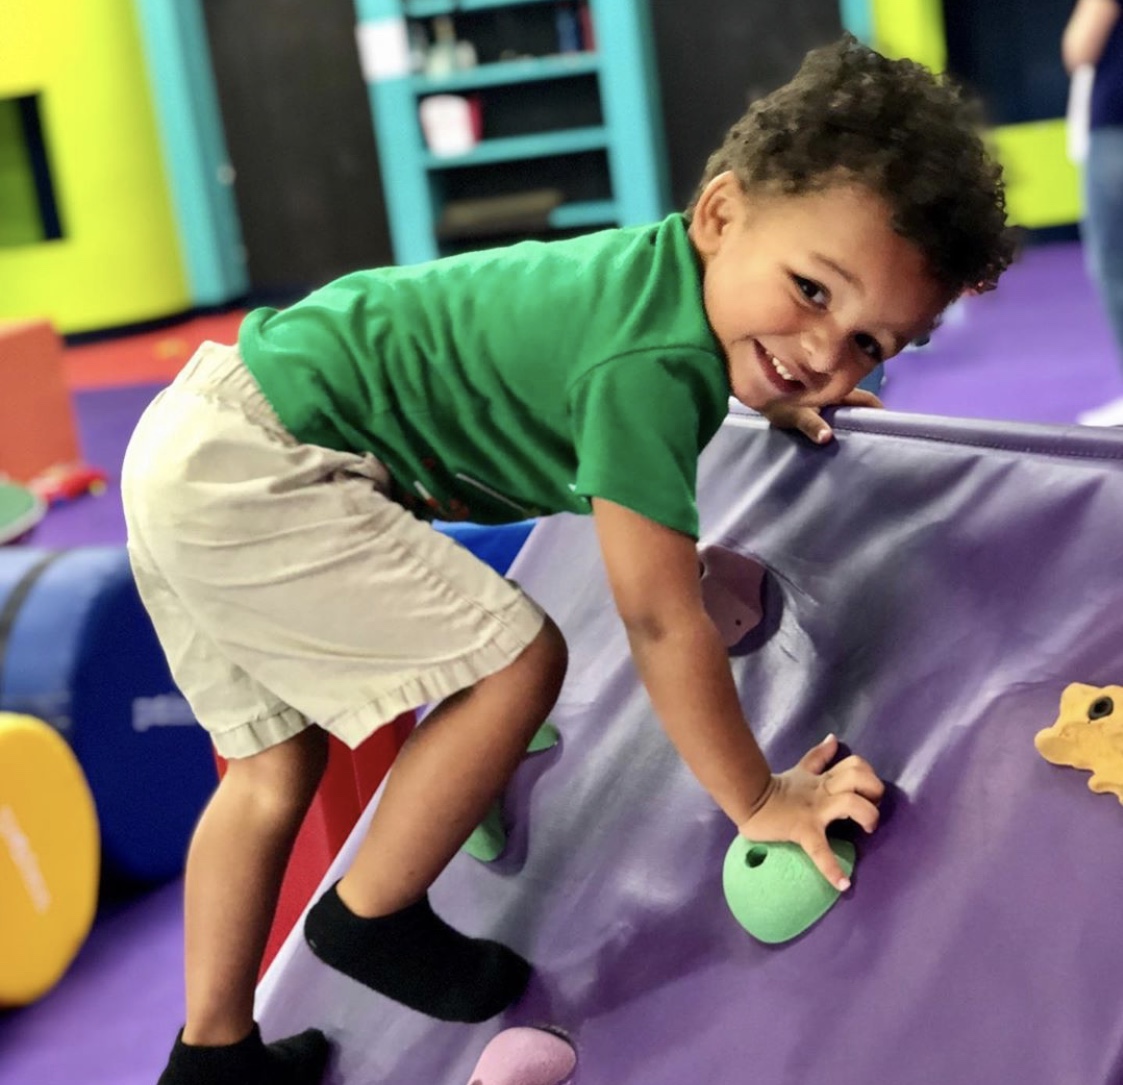 This sweet, smiling tot loves our toddler classes in Wethersfield.